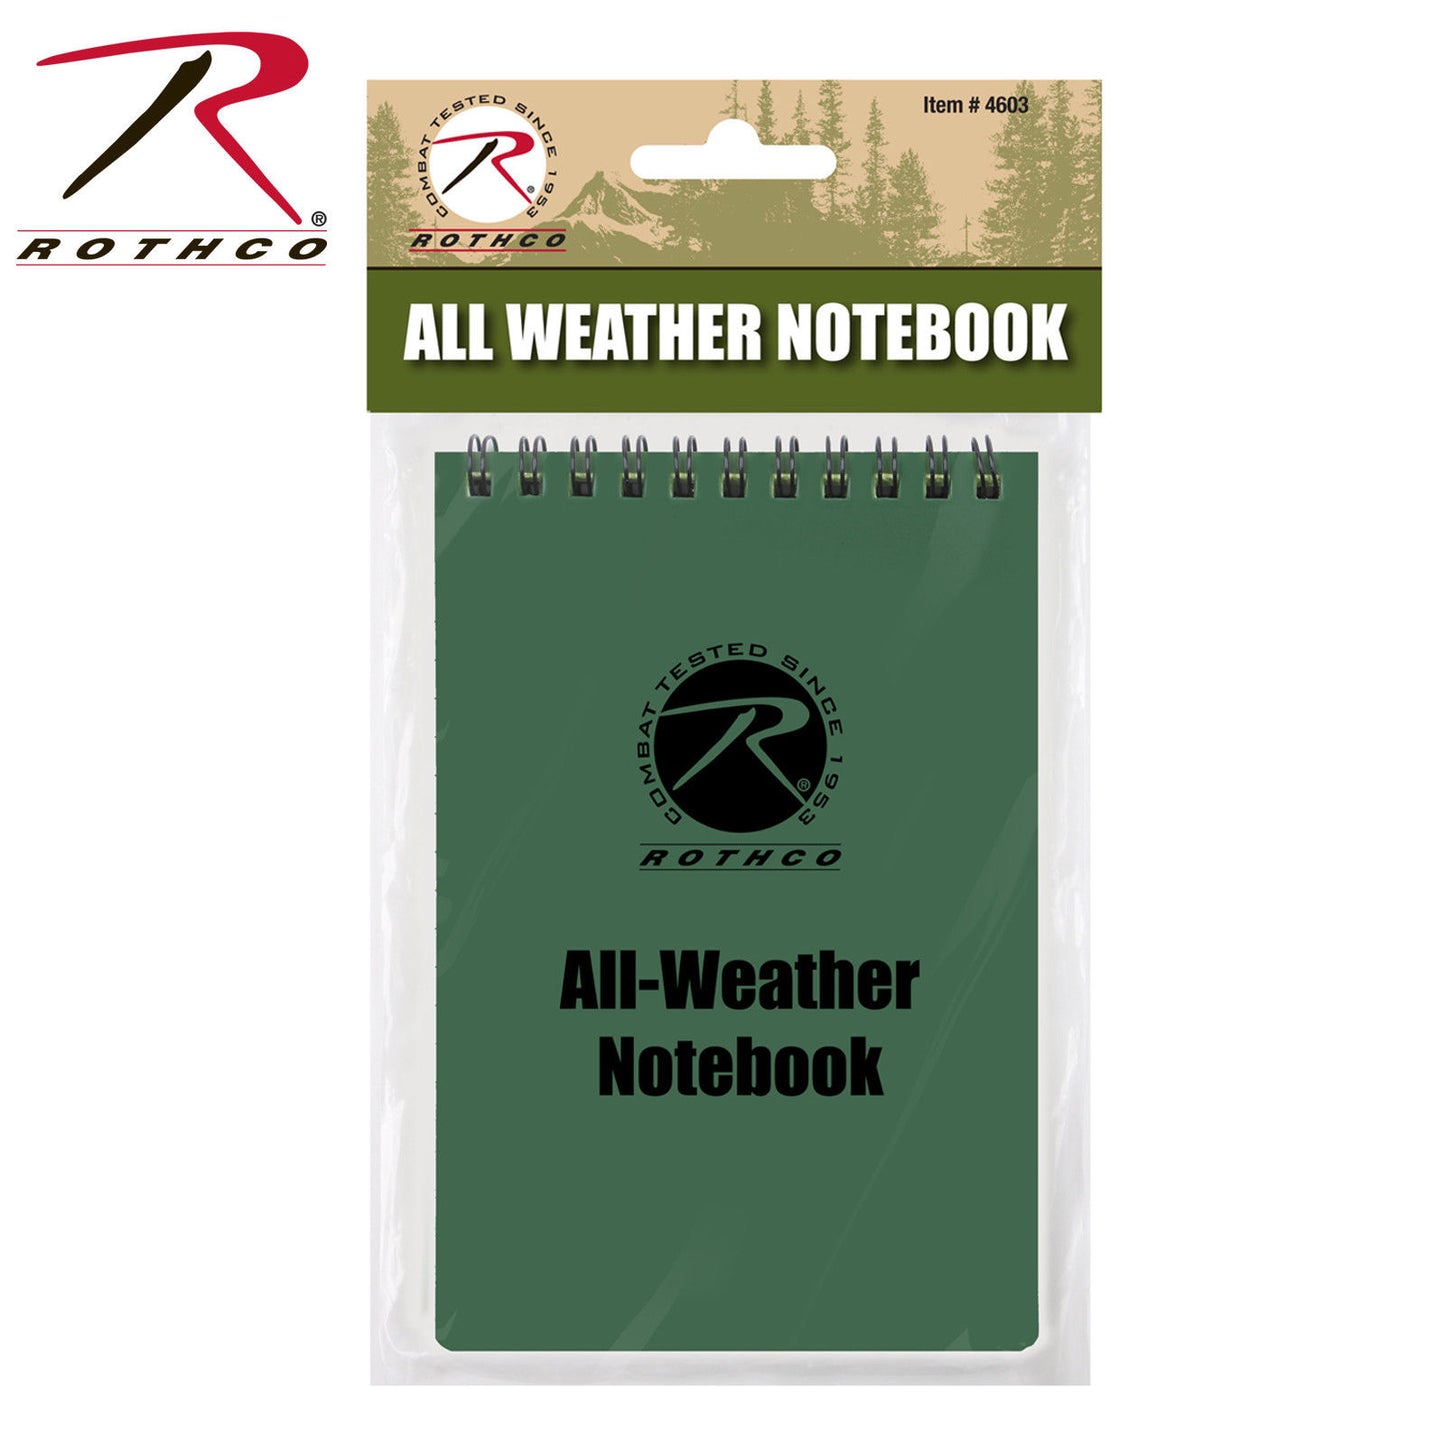 Rothco All Weather Waterproof Notebook - 4"x6" Olive Drab Waterproof Notepad